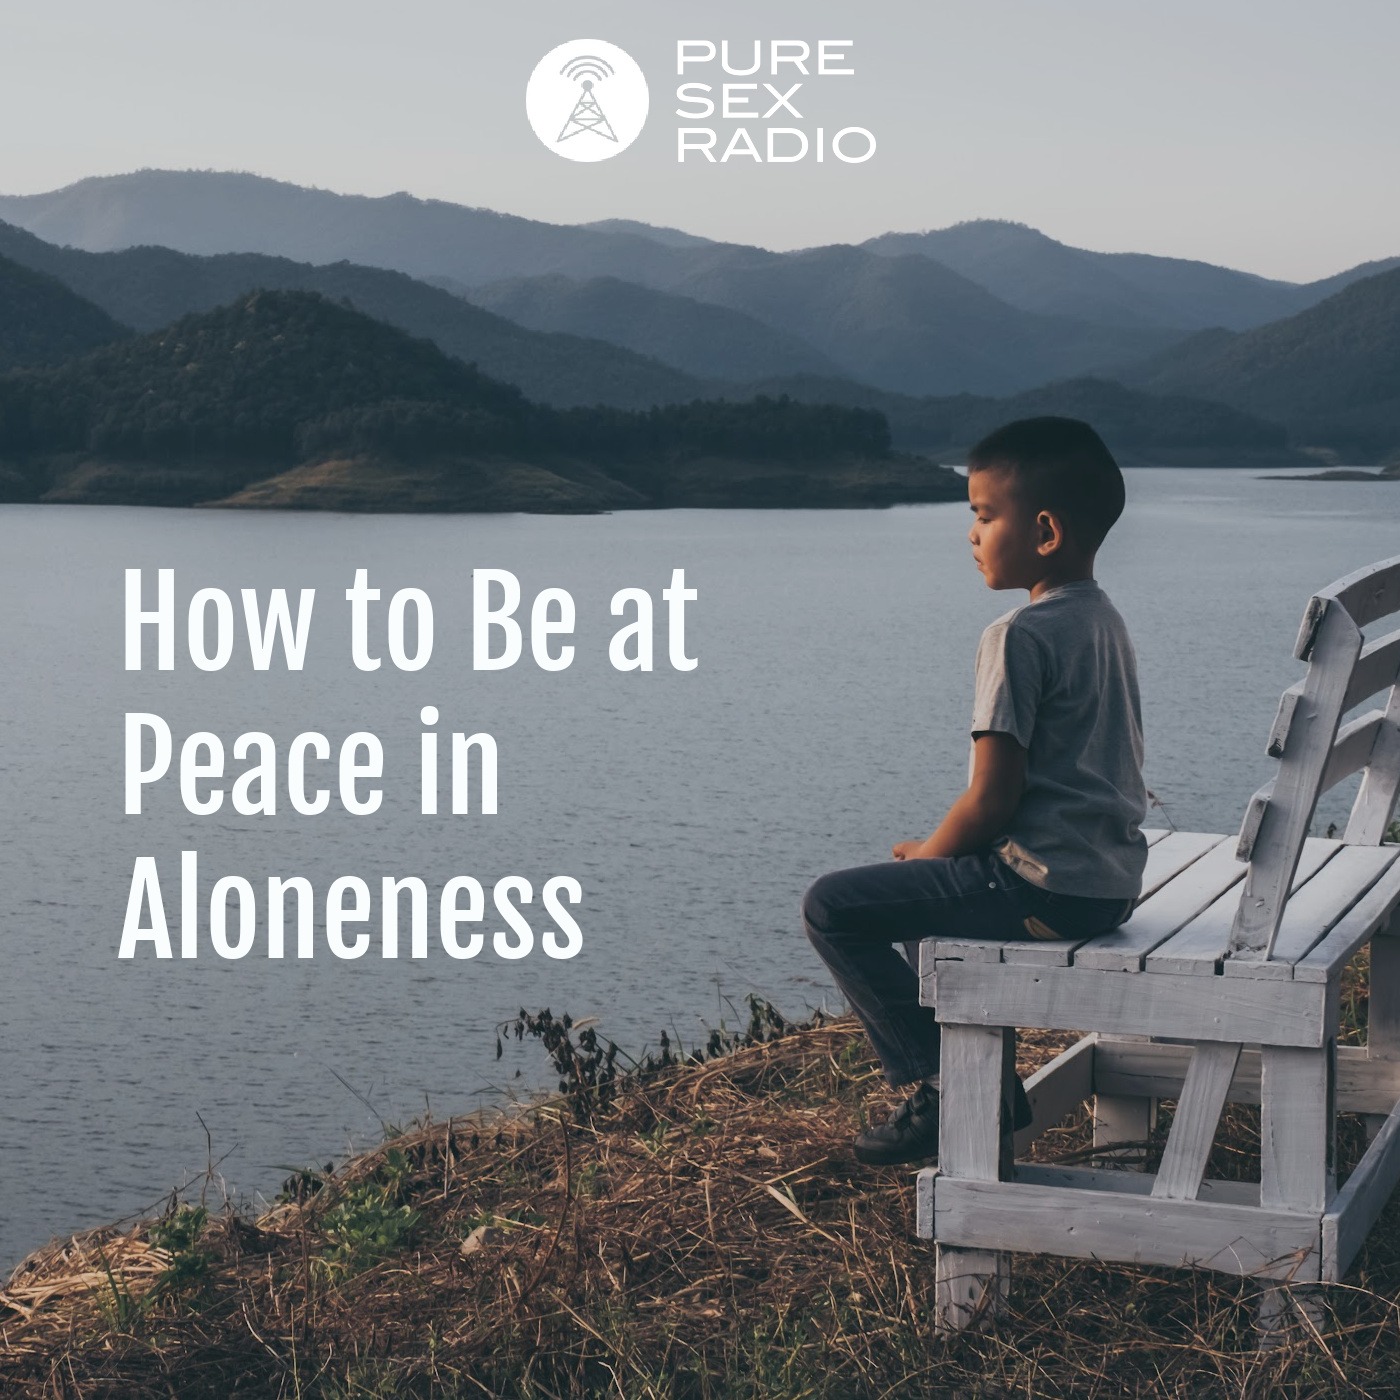 How to Be at Peace in Aloneness